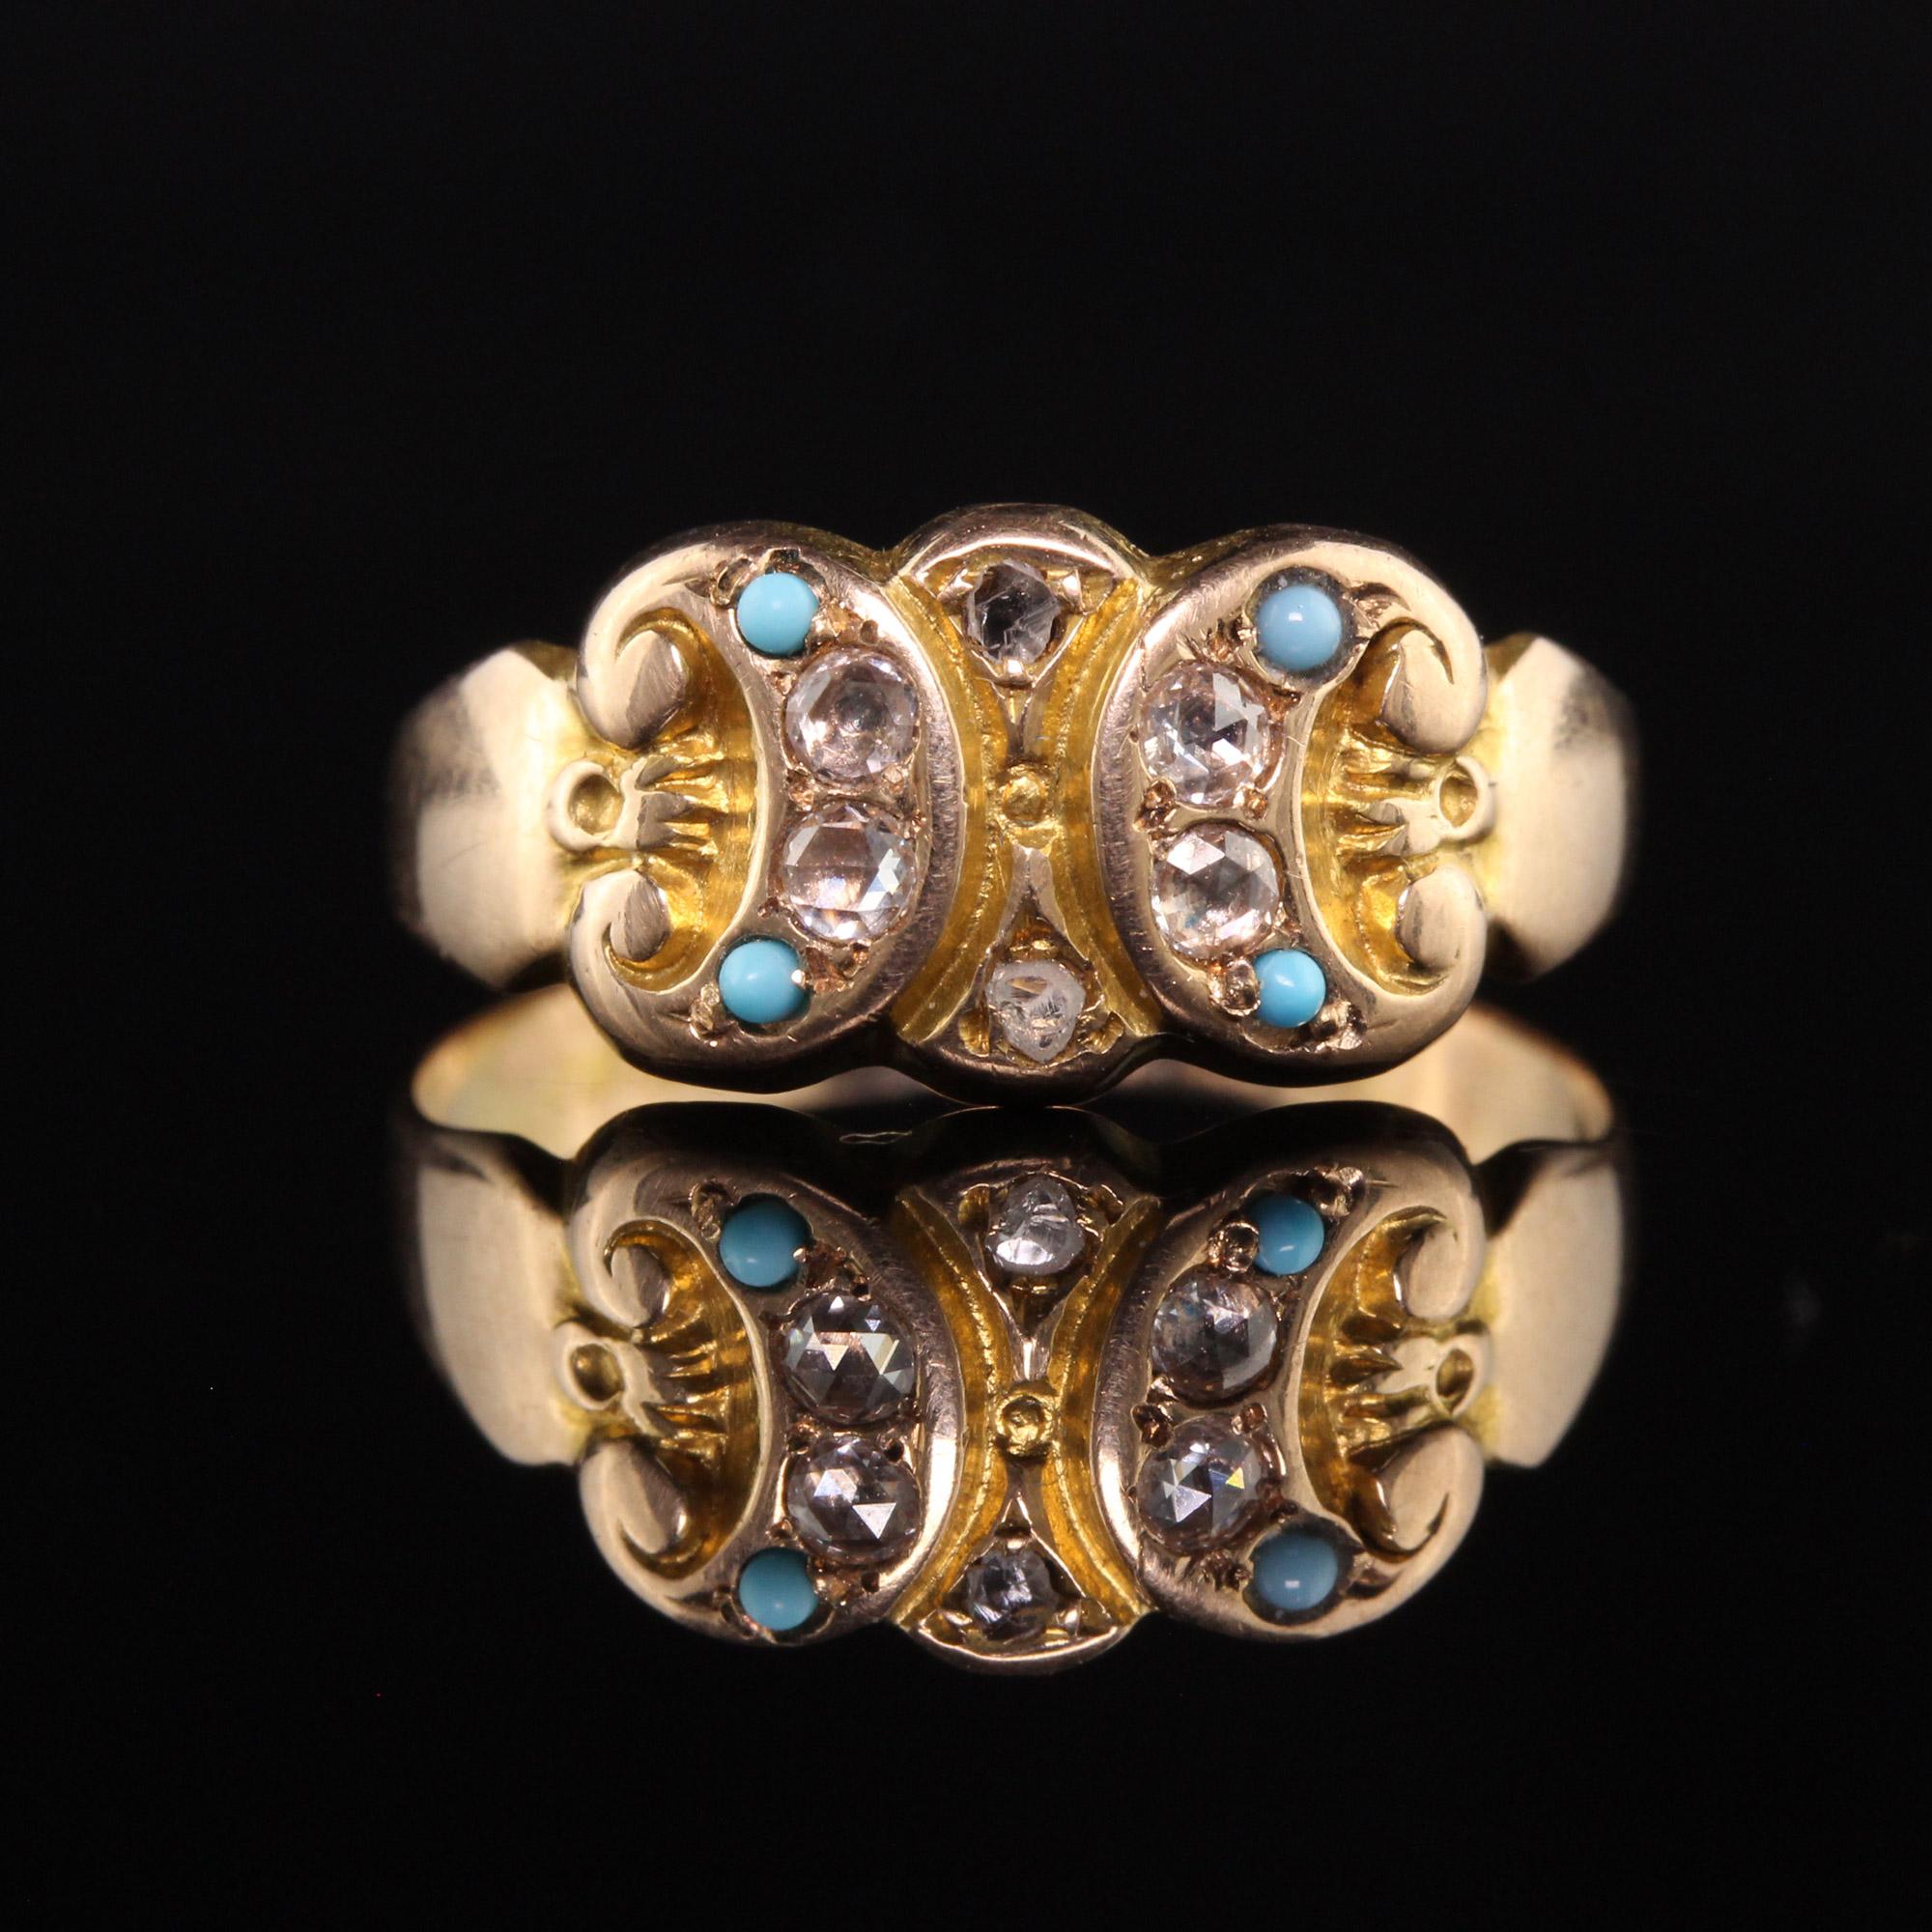 Antique Victorian English 15K Yellow Gold Rose Cut Diamond and Turquoise Ring For Sale 1